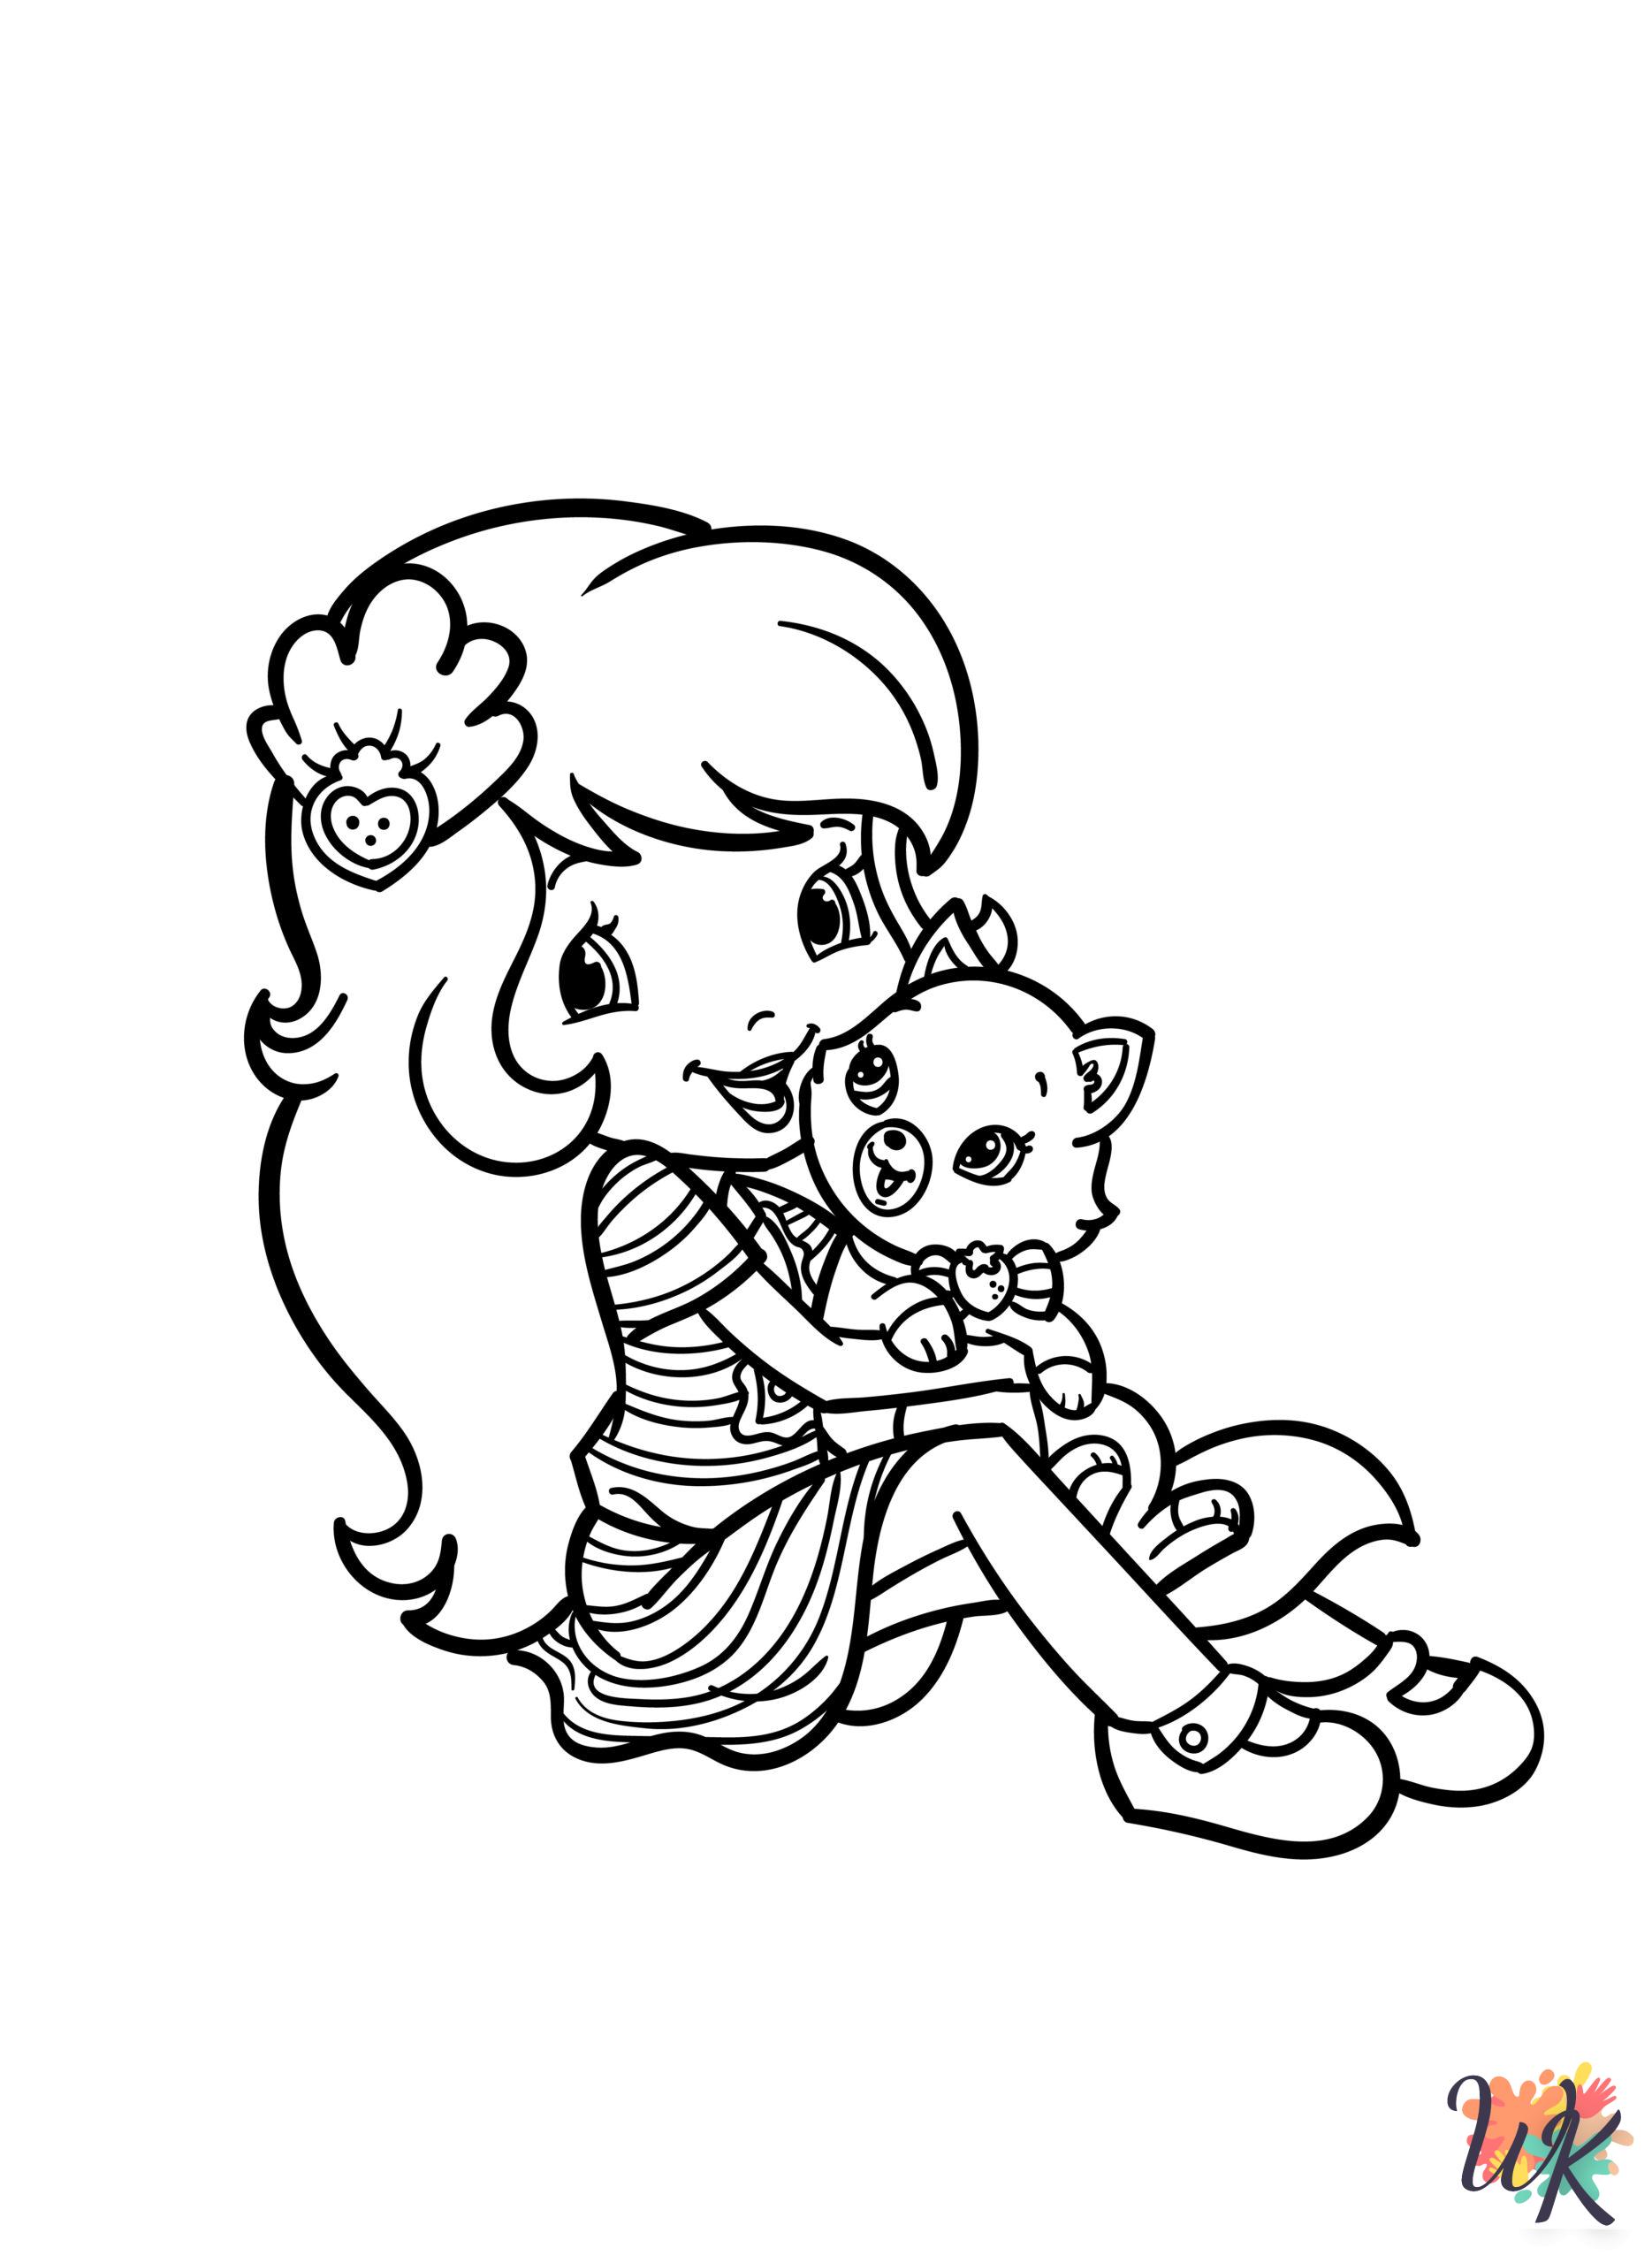 Strawberry Shortcake coloring pages for adults